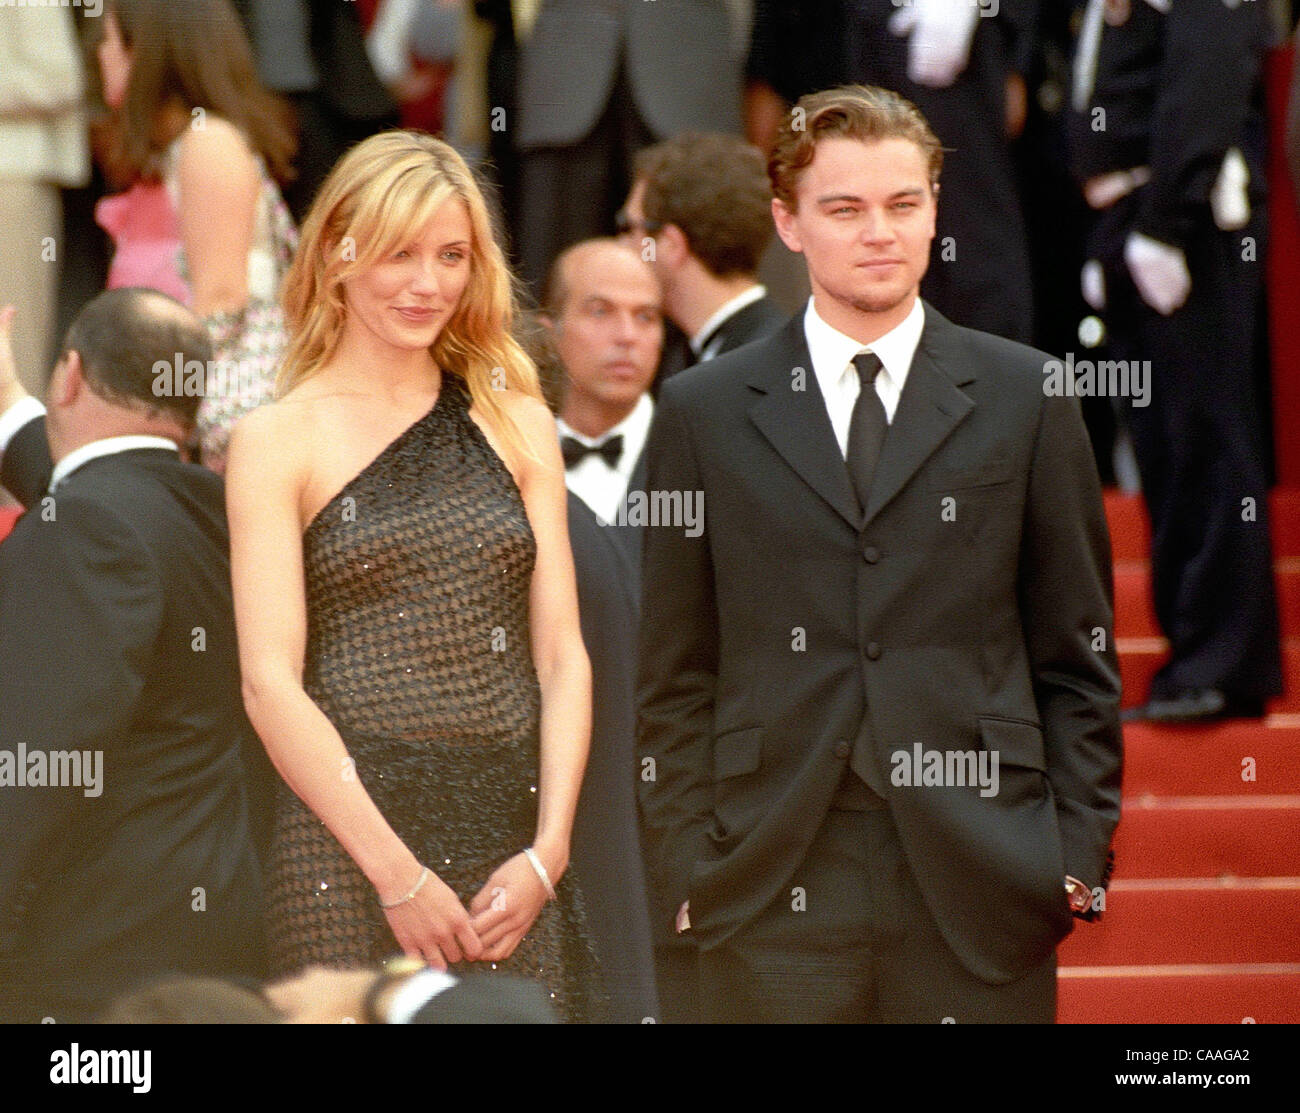 May 17, 2003; CANNES , FRENCH RIVIERA, FRANCE; LEONARDO DICAPRIO and CAMERON DIAZ at the Gangs of New York Premiere Mandatory Credit: Photo by Frederic Injimbert/ZUMA Press. (©) Copyright 2003 by Frederic Injimbert Stock Photo